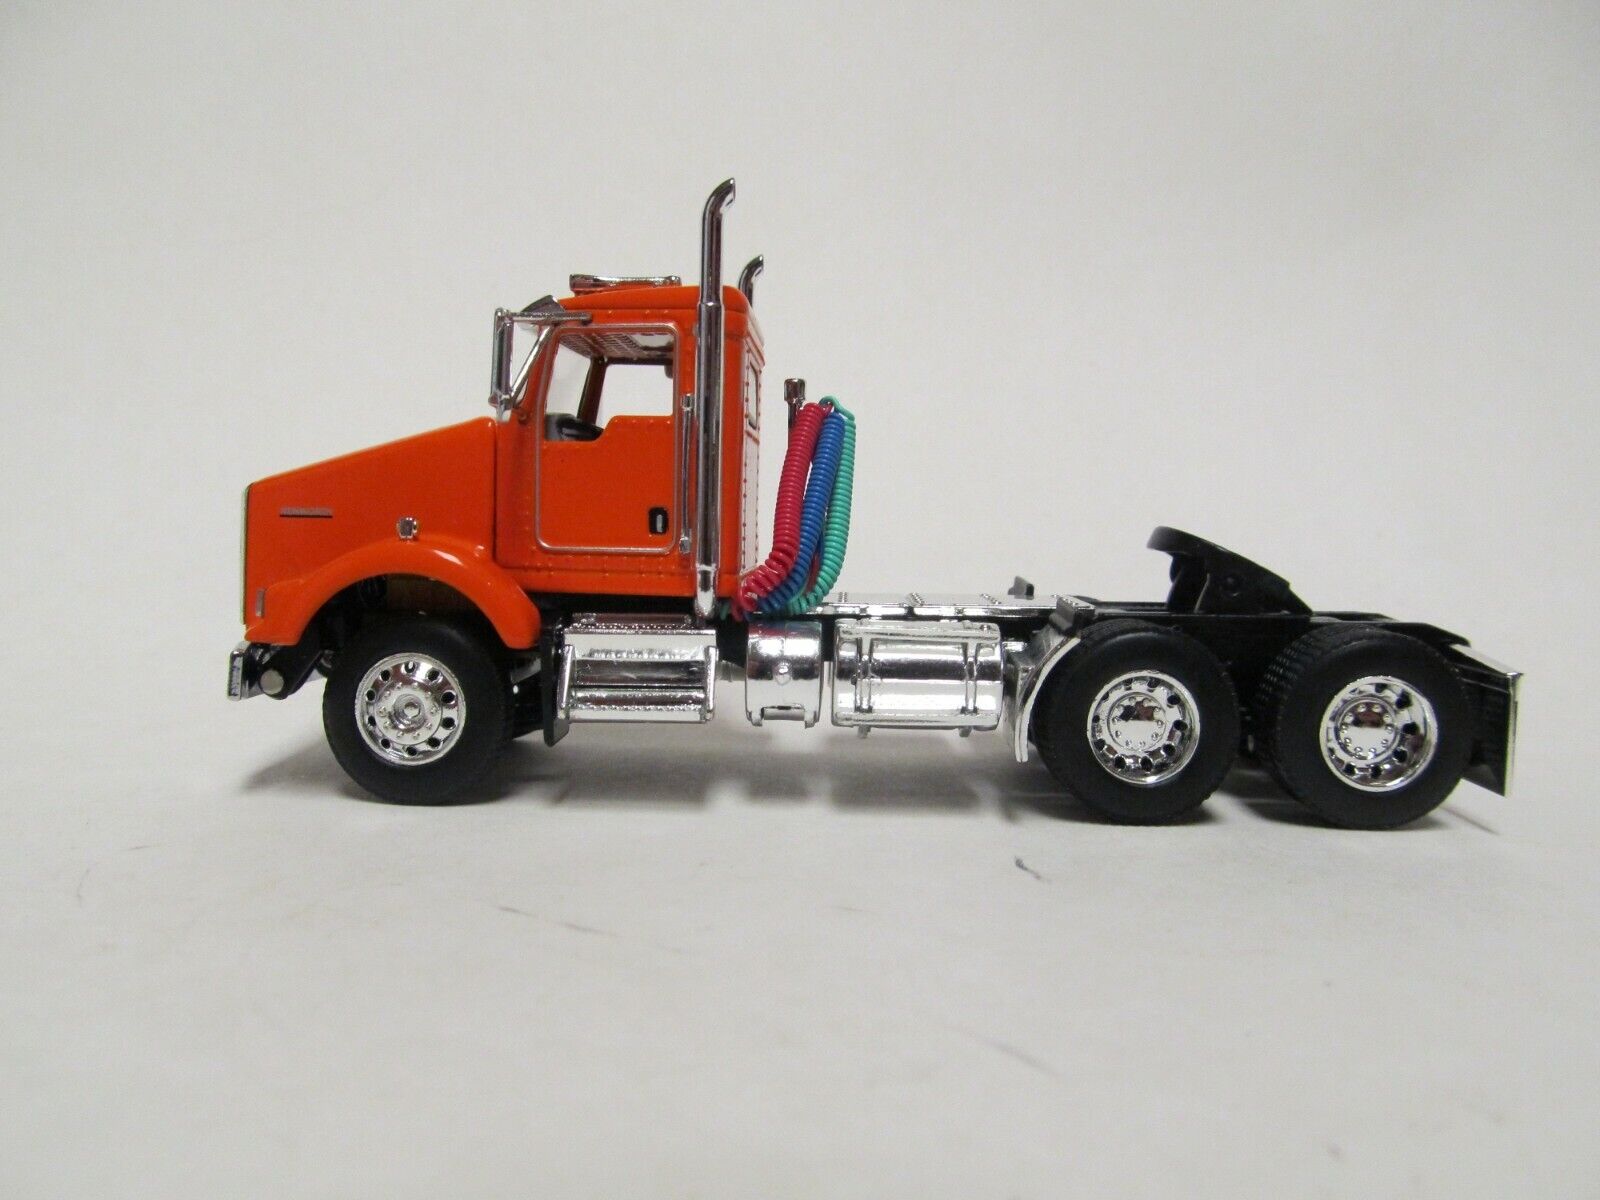 DCP / FIRST GEAR 1/64 SCALE T-800 KENWORTH DAY CAB, ORANGE, YELLOW ENGINE  2